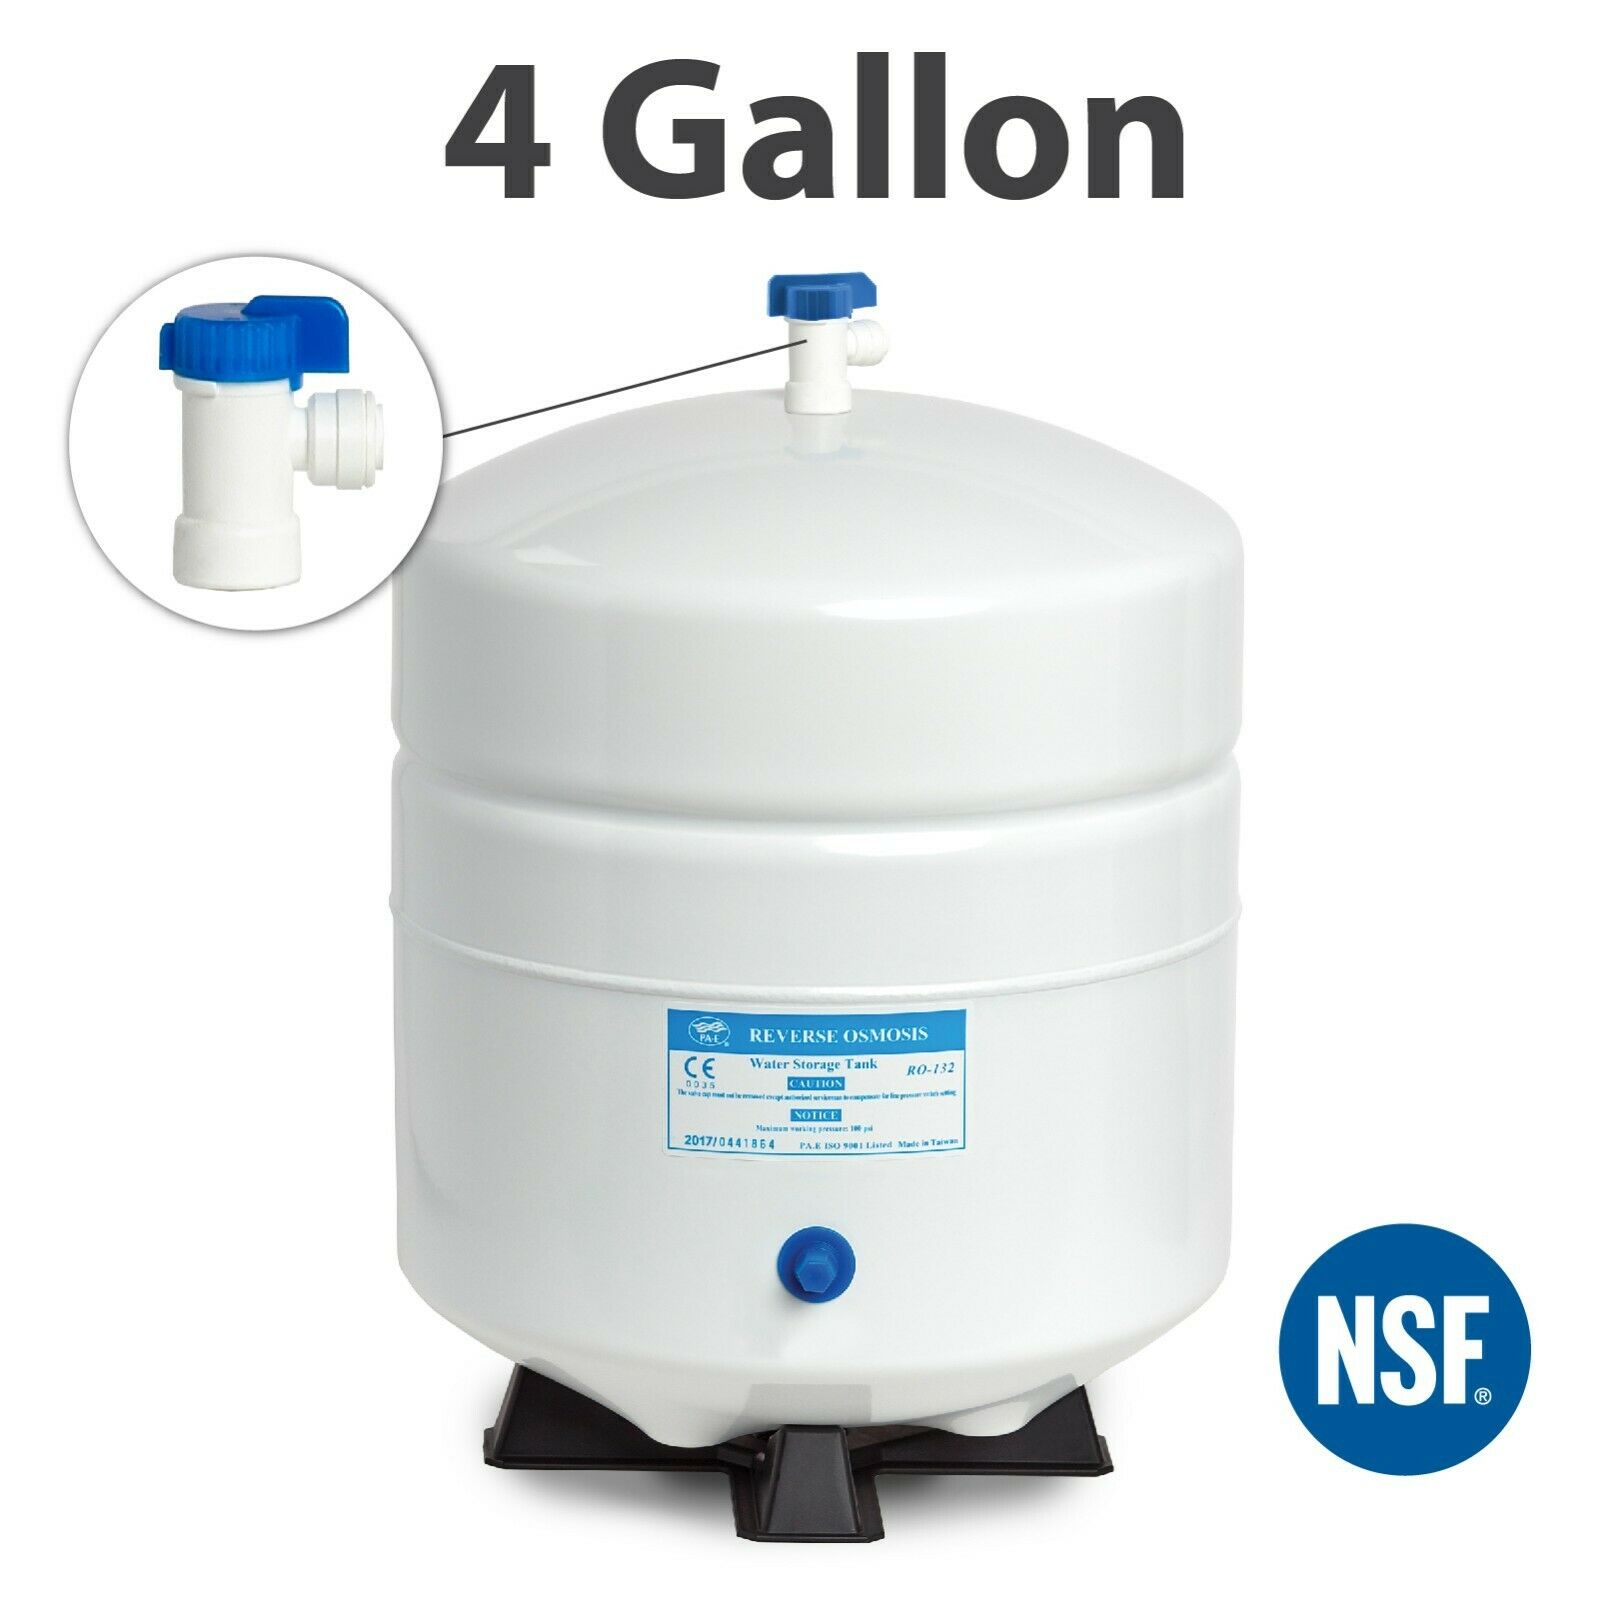 4-gallon Pressurized Ro Water Storage Tank By Pa-e Nsf Certified 1/4" Ball Valve